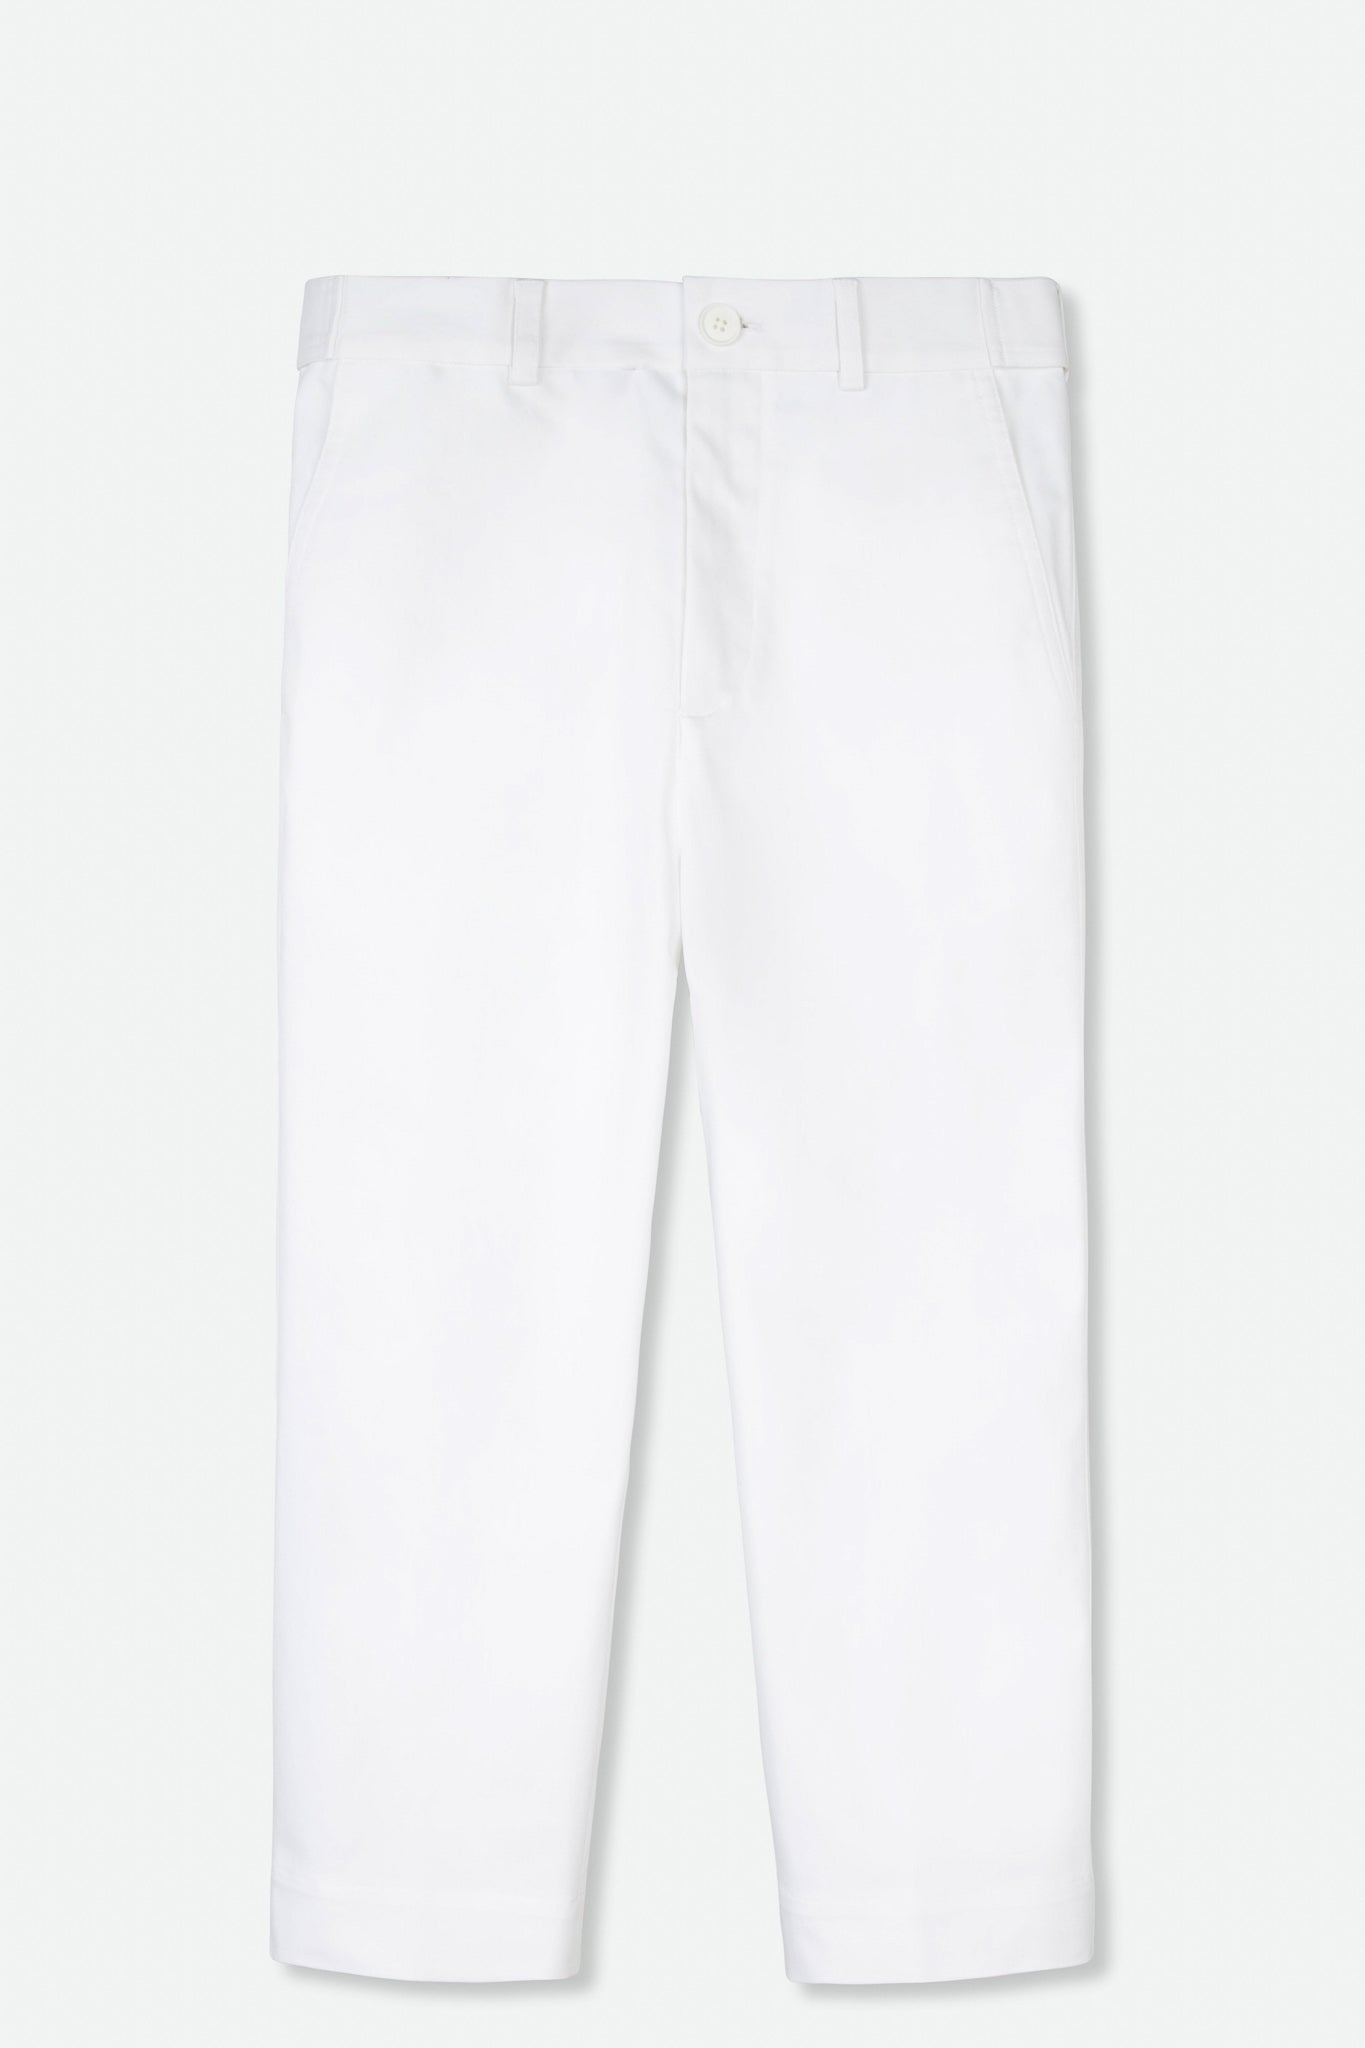 GEORGIA PANT IN TECHNICAL STRETCH COTTON - Jarbo